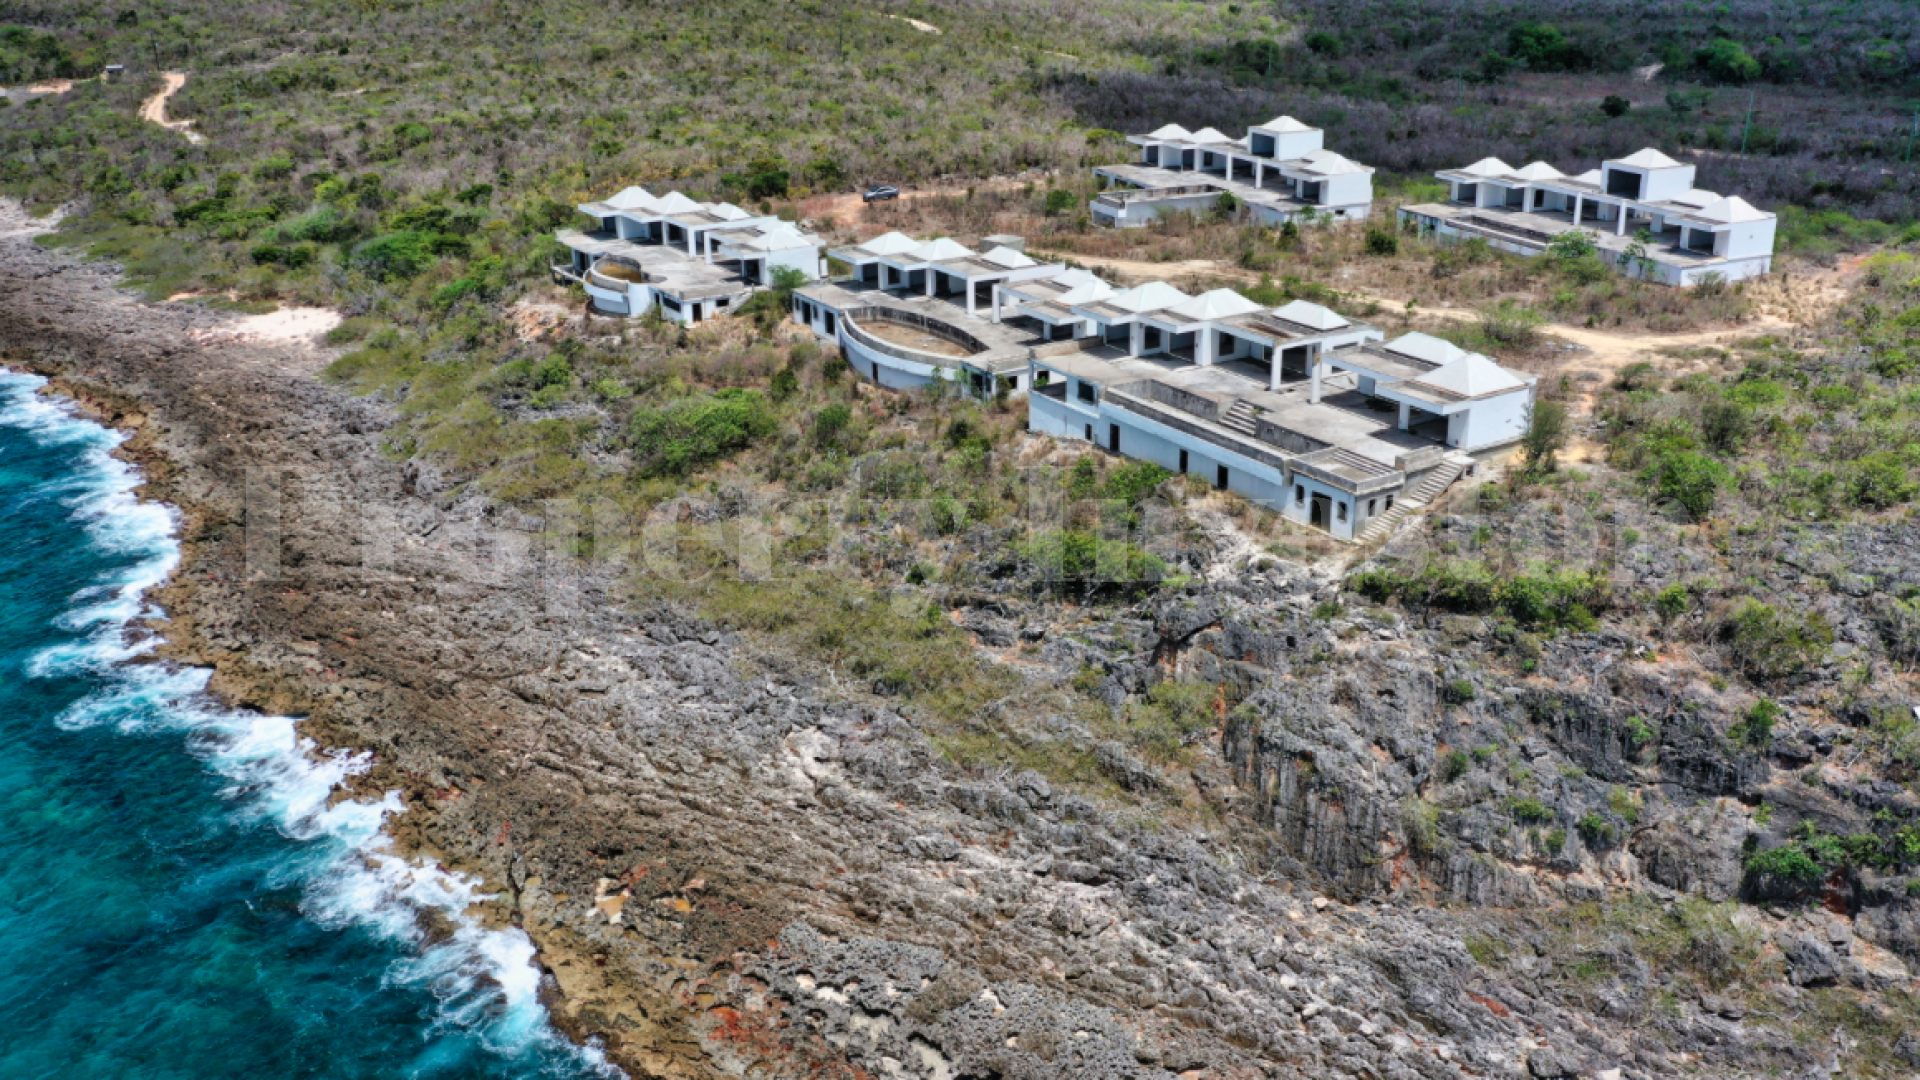 Well Located Development of 2.3 Hectares with 5 Unfinished Oceanfront Villas for Sale Near Shoal Bay, Anguilla